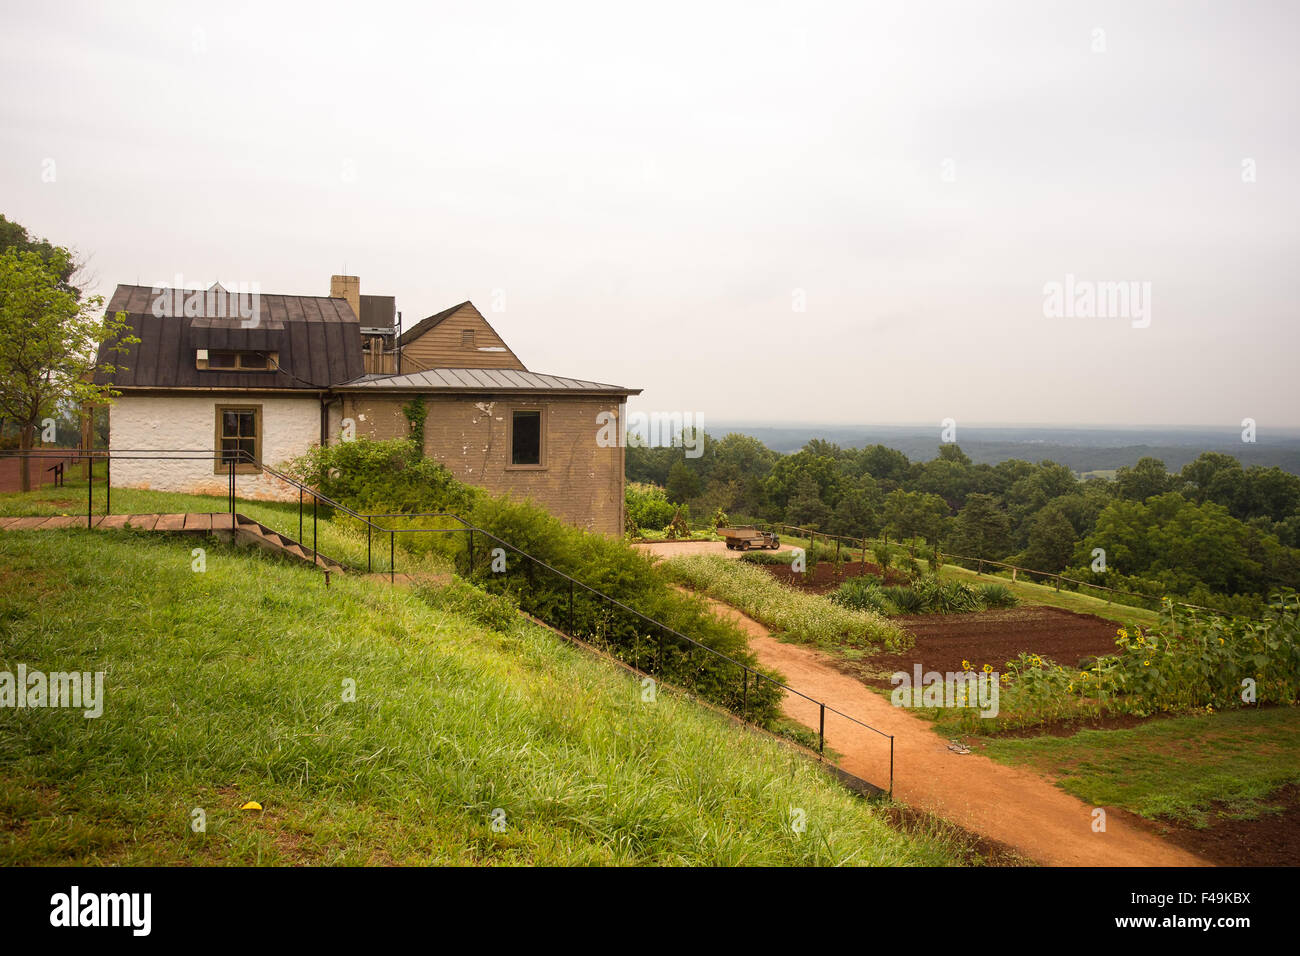 Terraced farm on hillside at Monticello, the former home of President Thomas Jefferson. Stock Photo